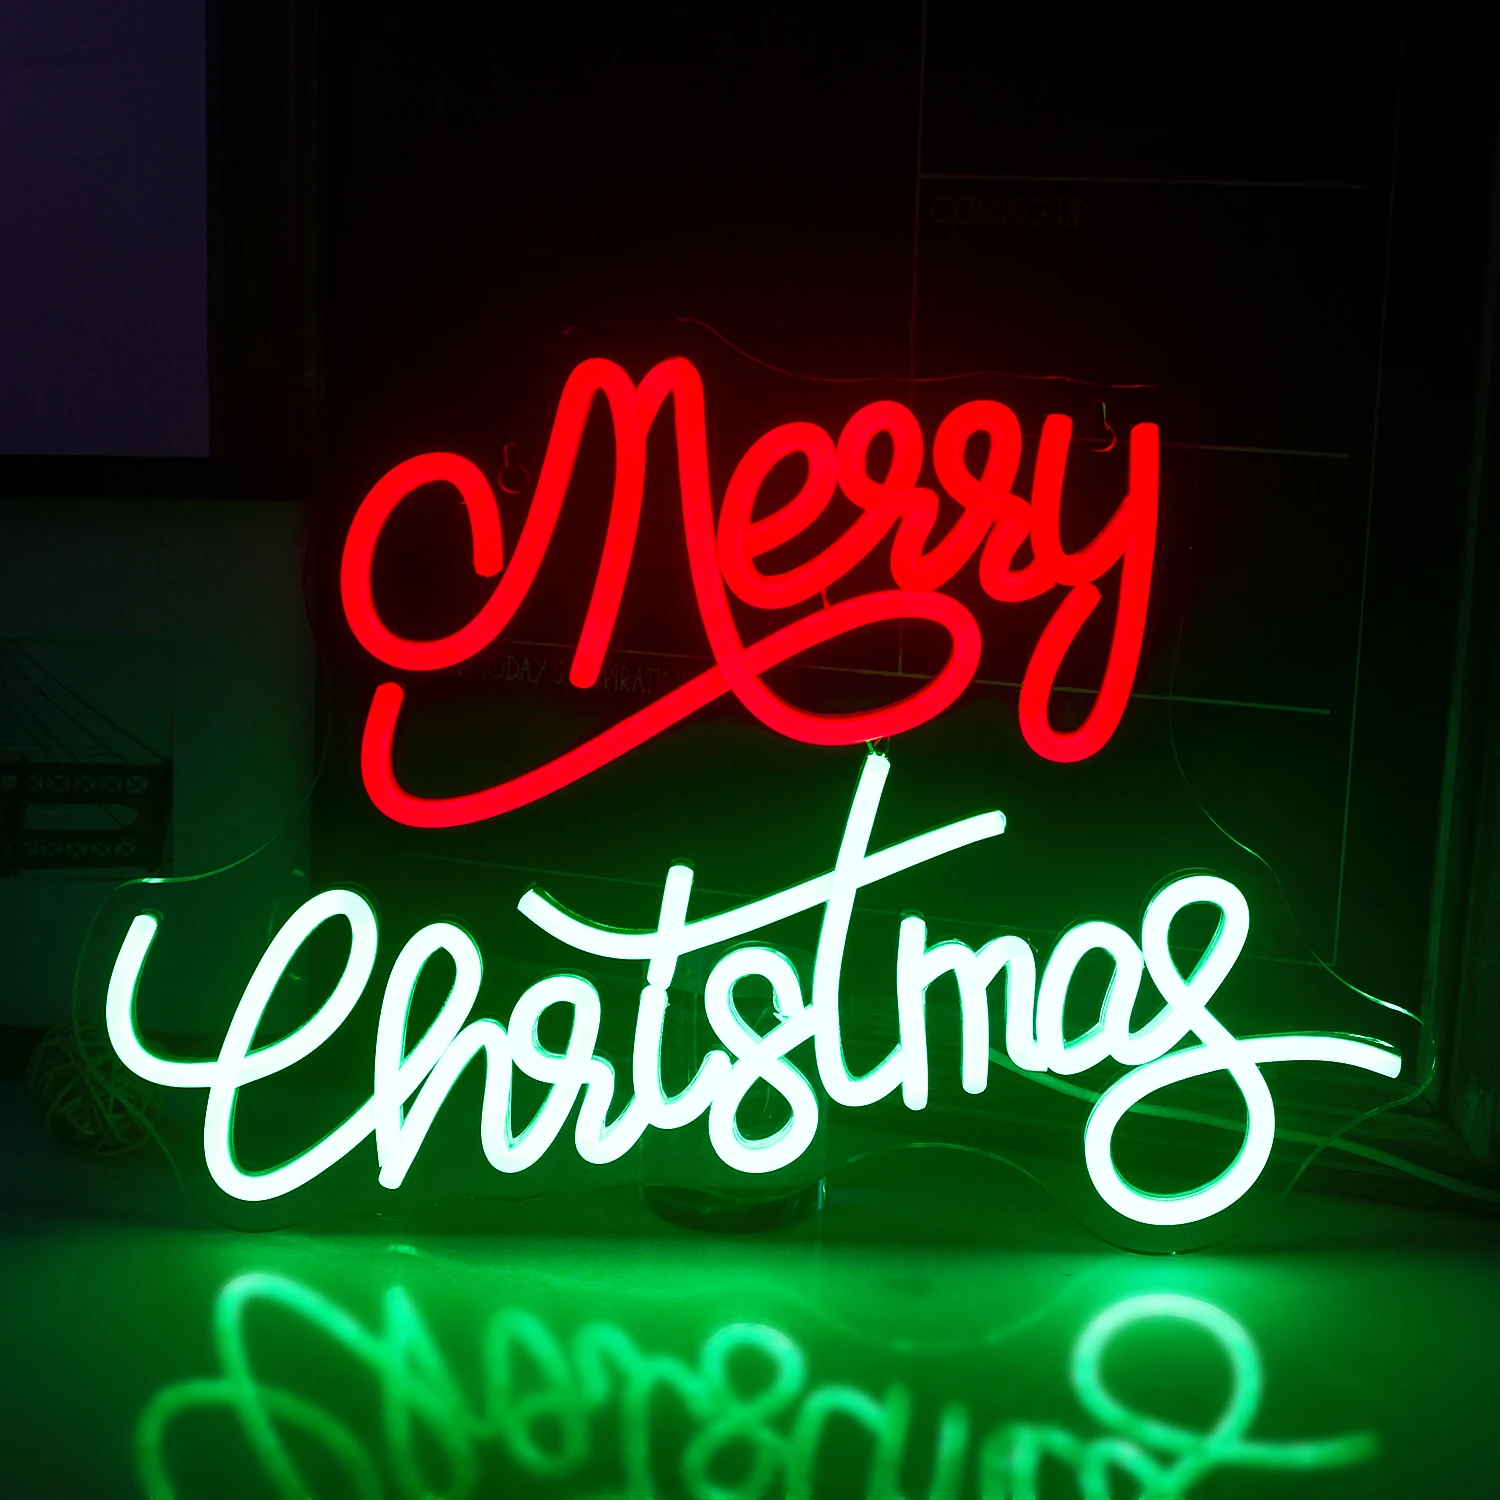 

Merry Christmas Neon Sign Bedroom Christmas Party Decor Personalized Home Party Office Bar Pub Club Decor Wall Hanging Art Light